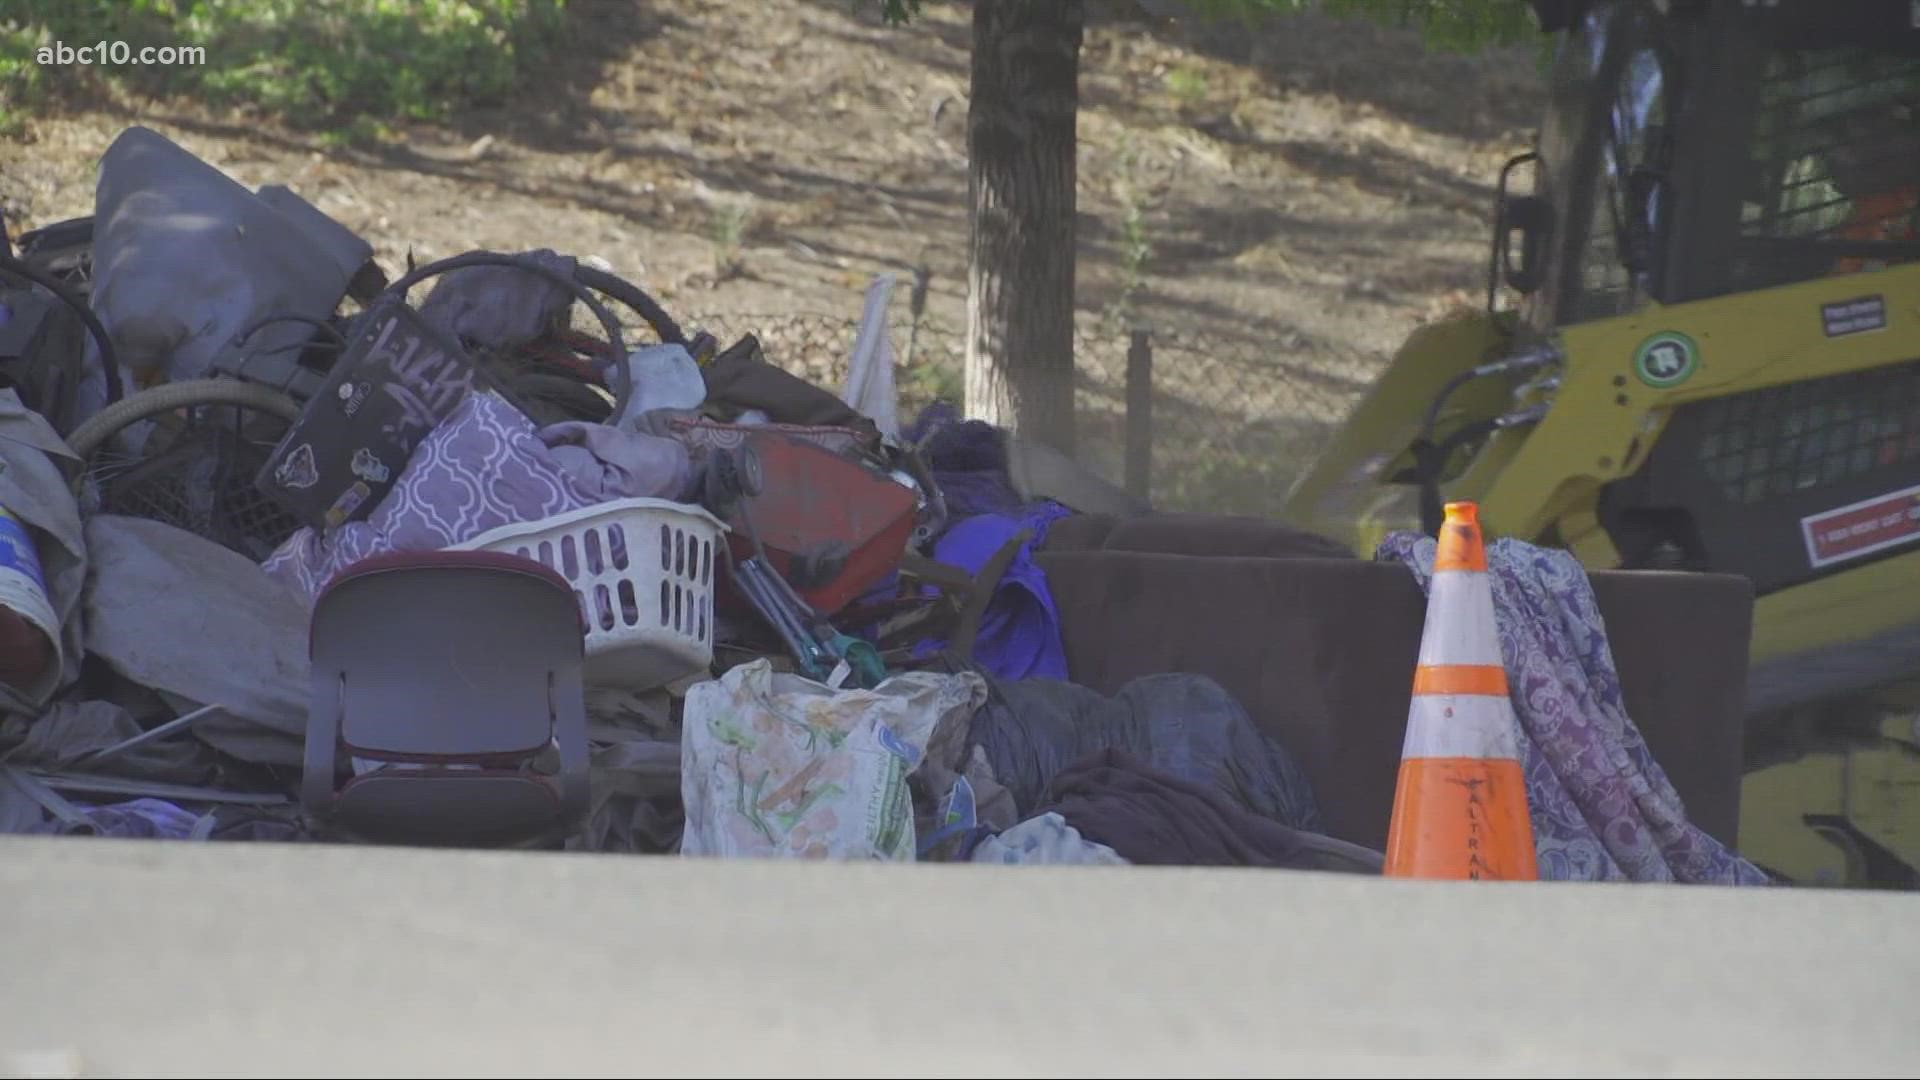 ABC10's Lena Howland provides updates on Caltrans' homeless encampment cleanup project.